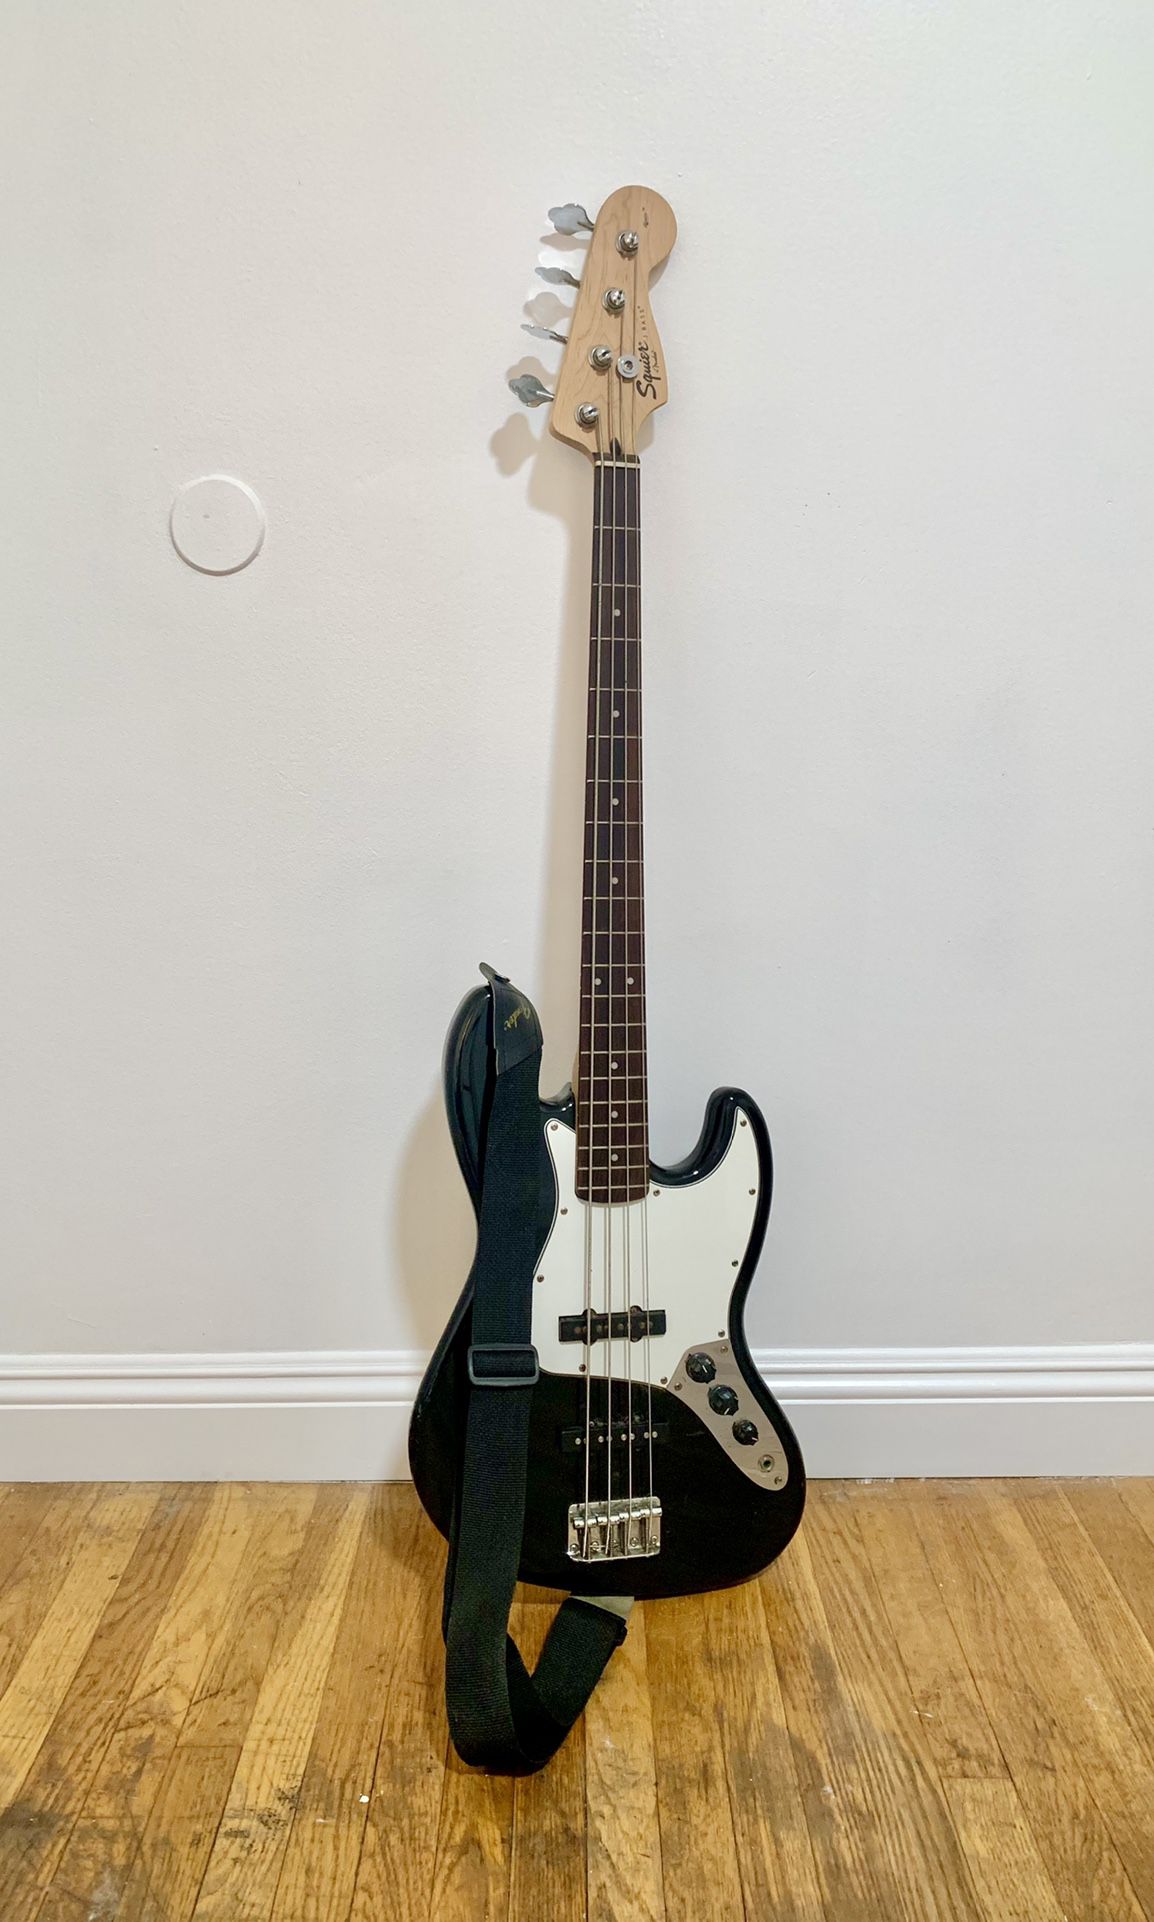 Fender Squier J Bass Electric Guitar Affinity Series • Made in Indonesia (with strap)